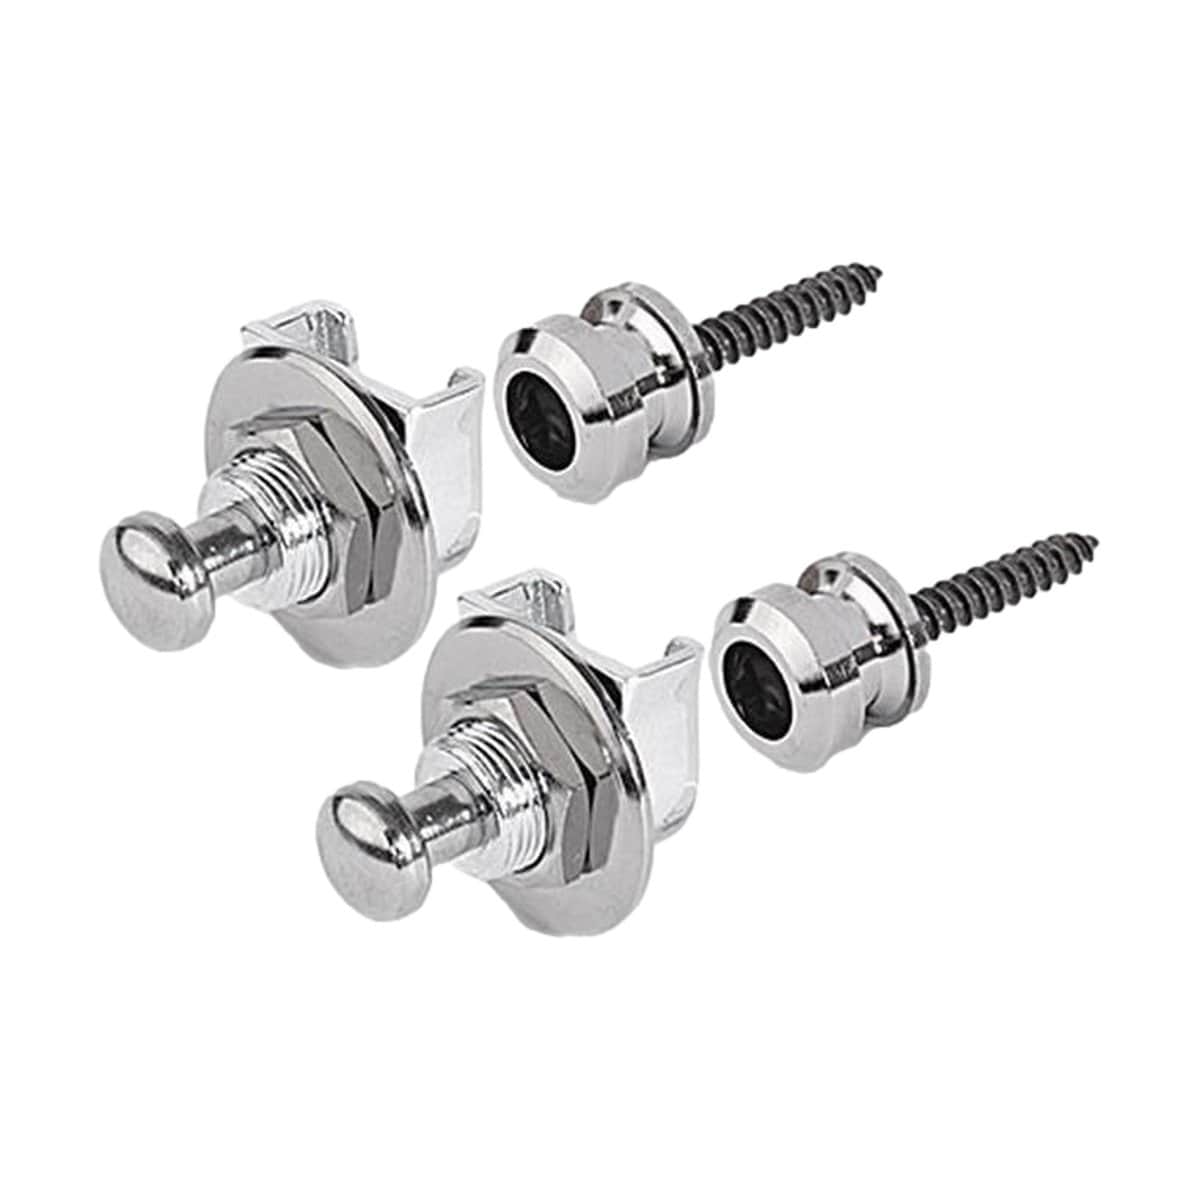 Grover Guitar Accessories Grover Strap Locks Quick Release Chrome Pair GRO651 - Byron Music